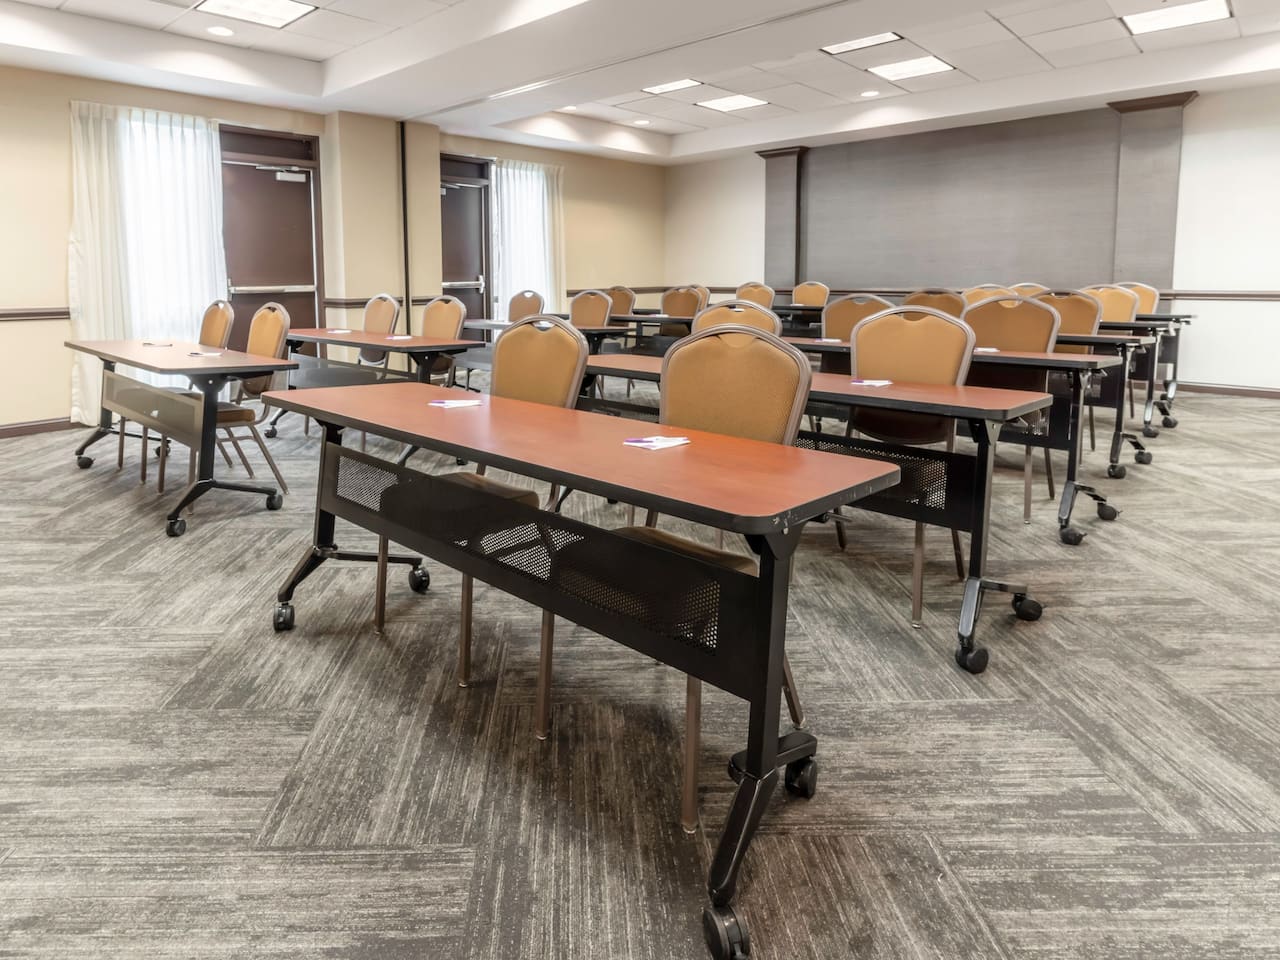 Classroom style meeting space at Hyatt Place Charlotte Airport/Billy Graham Parkway.